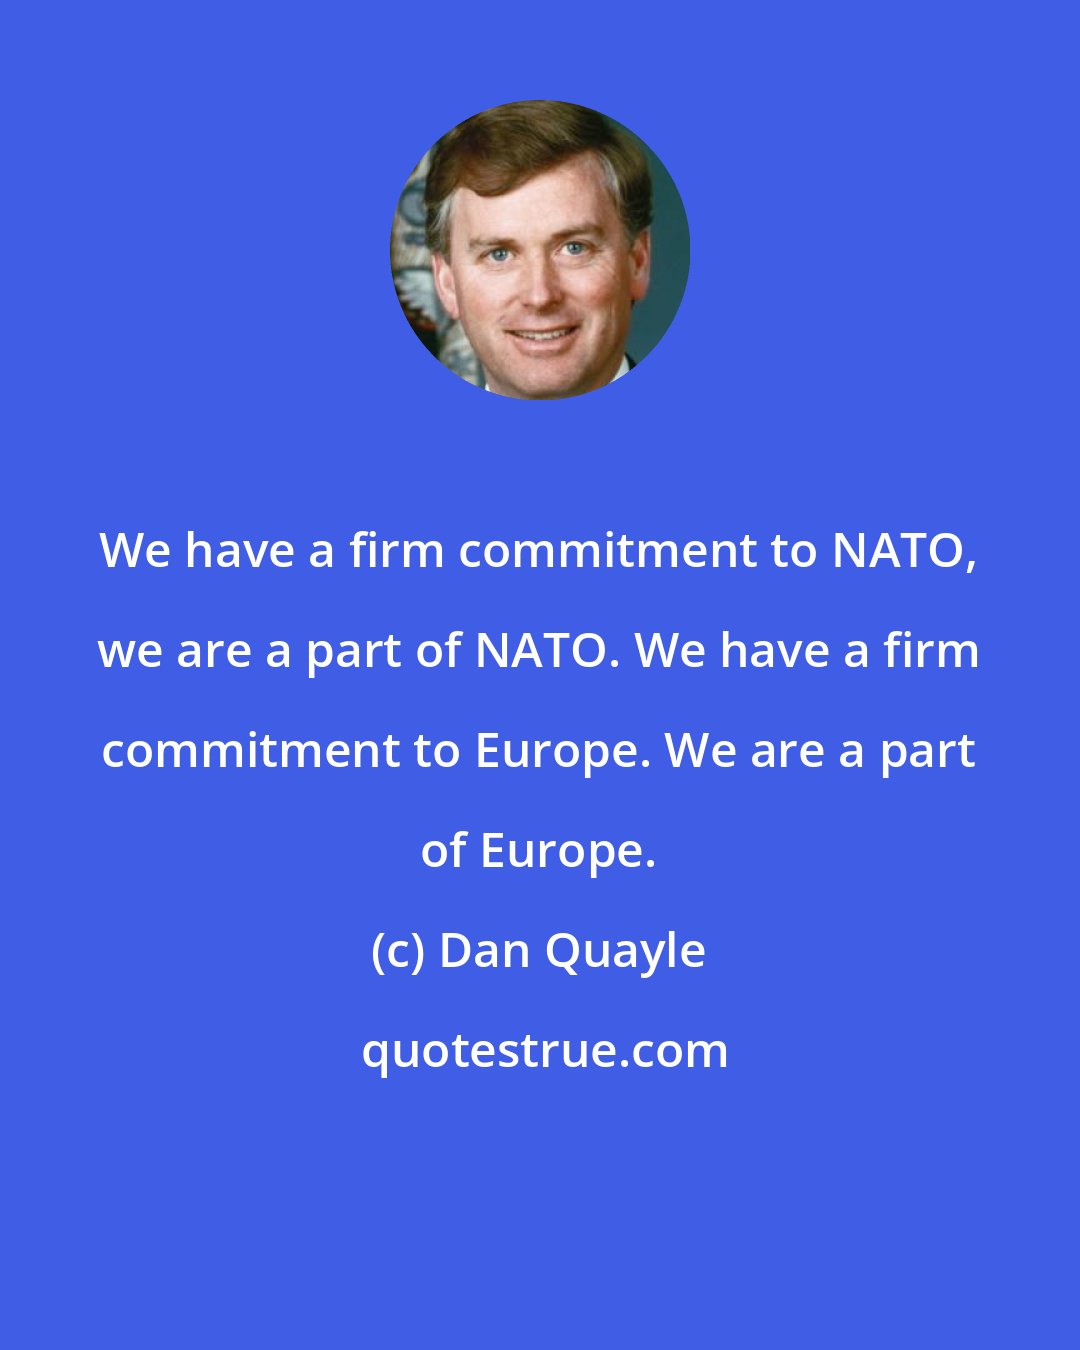 Dan Quayle: We have a firm commitment to NATO, we are a part of NATO. We have a firm commitment to Europe. We are a part of Europe.